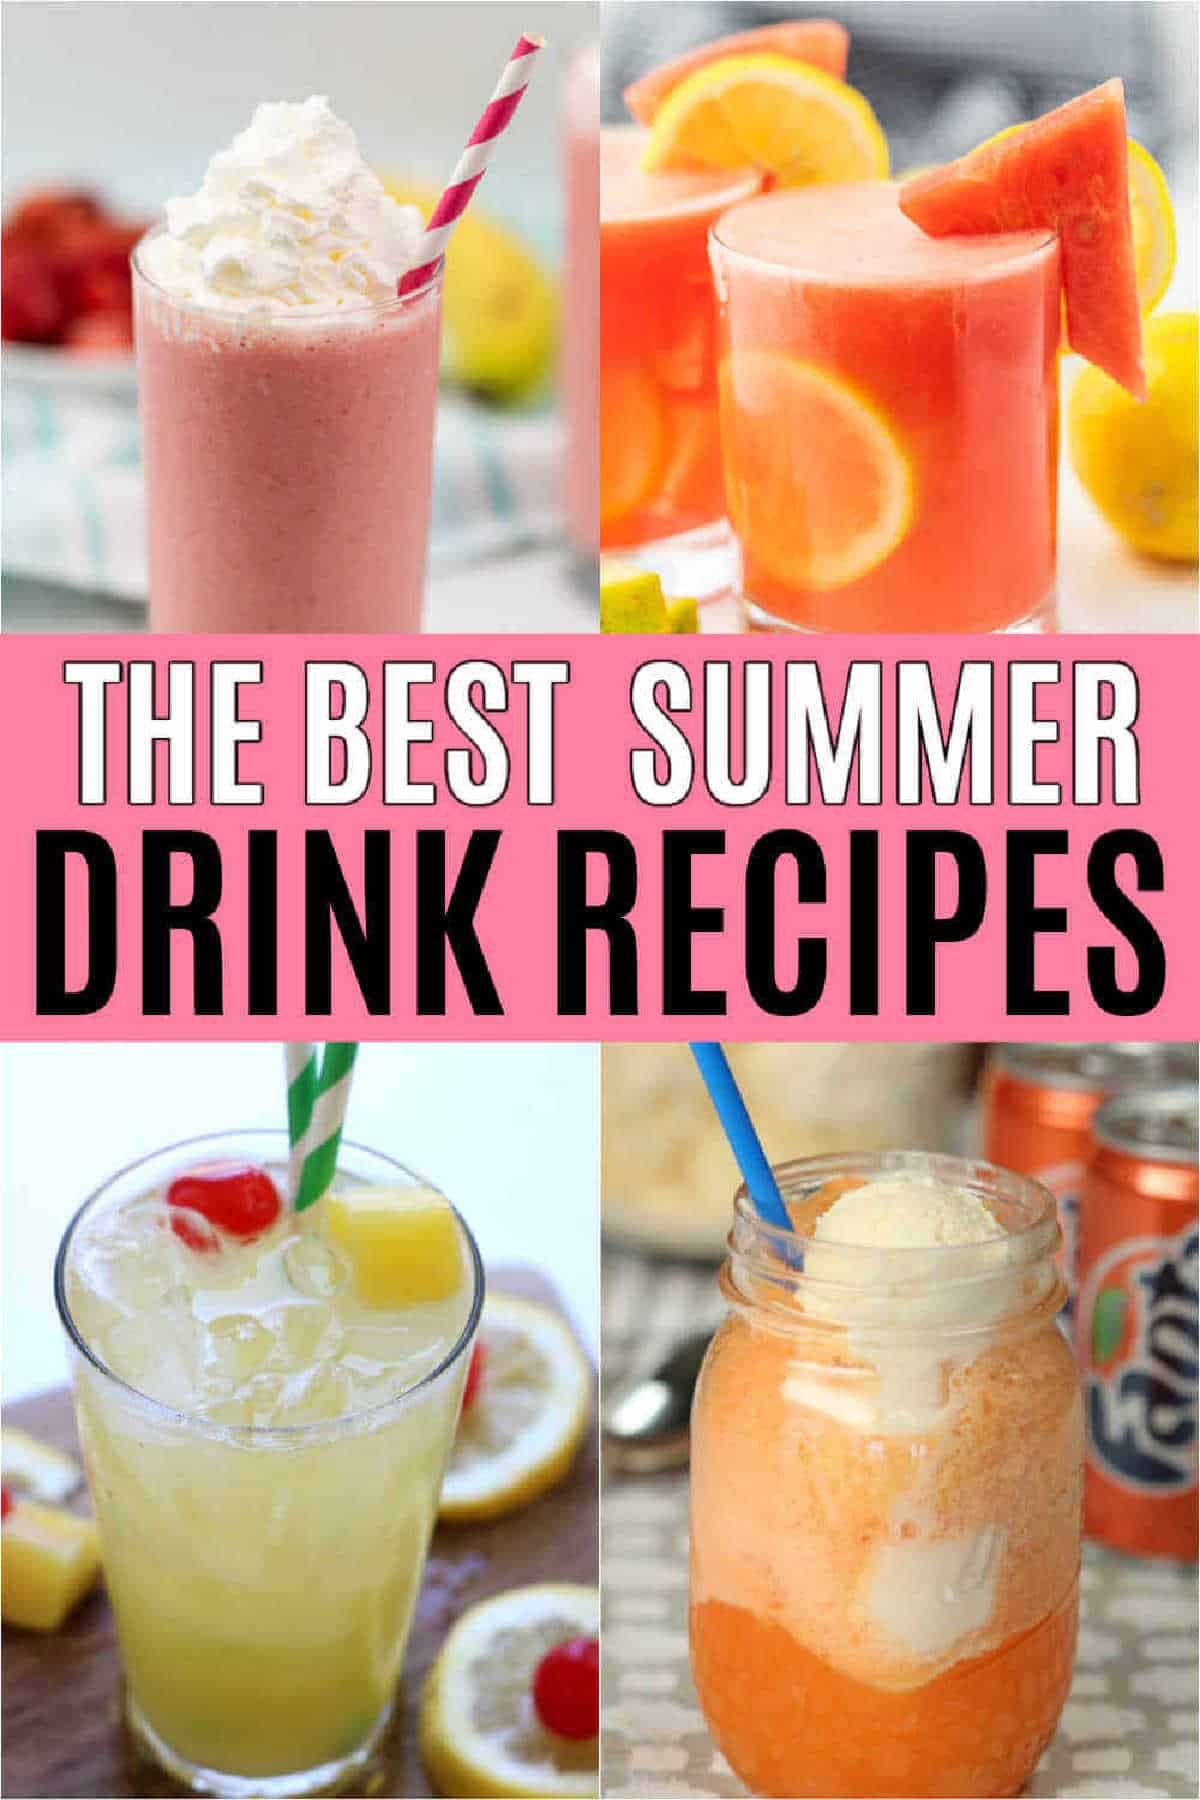 Photos of 4 summer drinks with the words the best summer drink recipes over the top of the photo. 